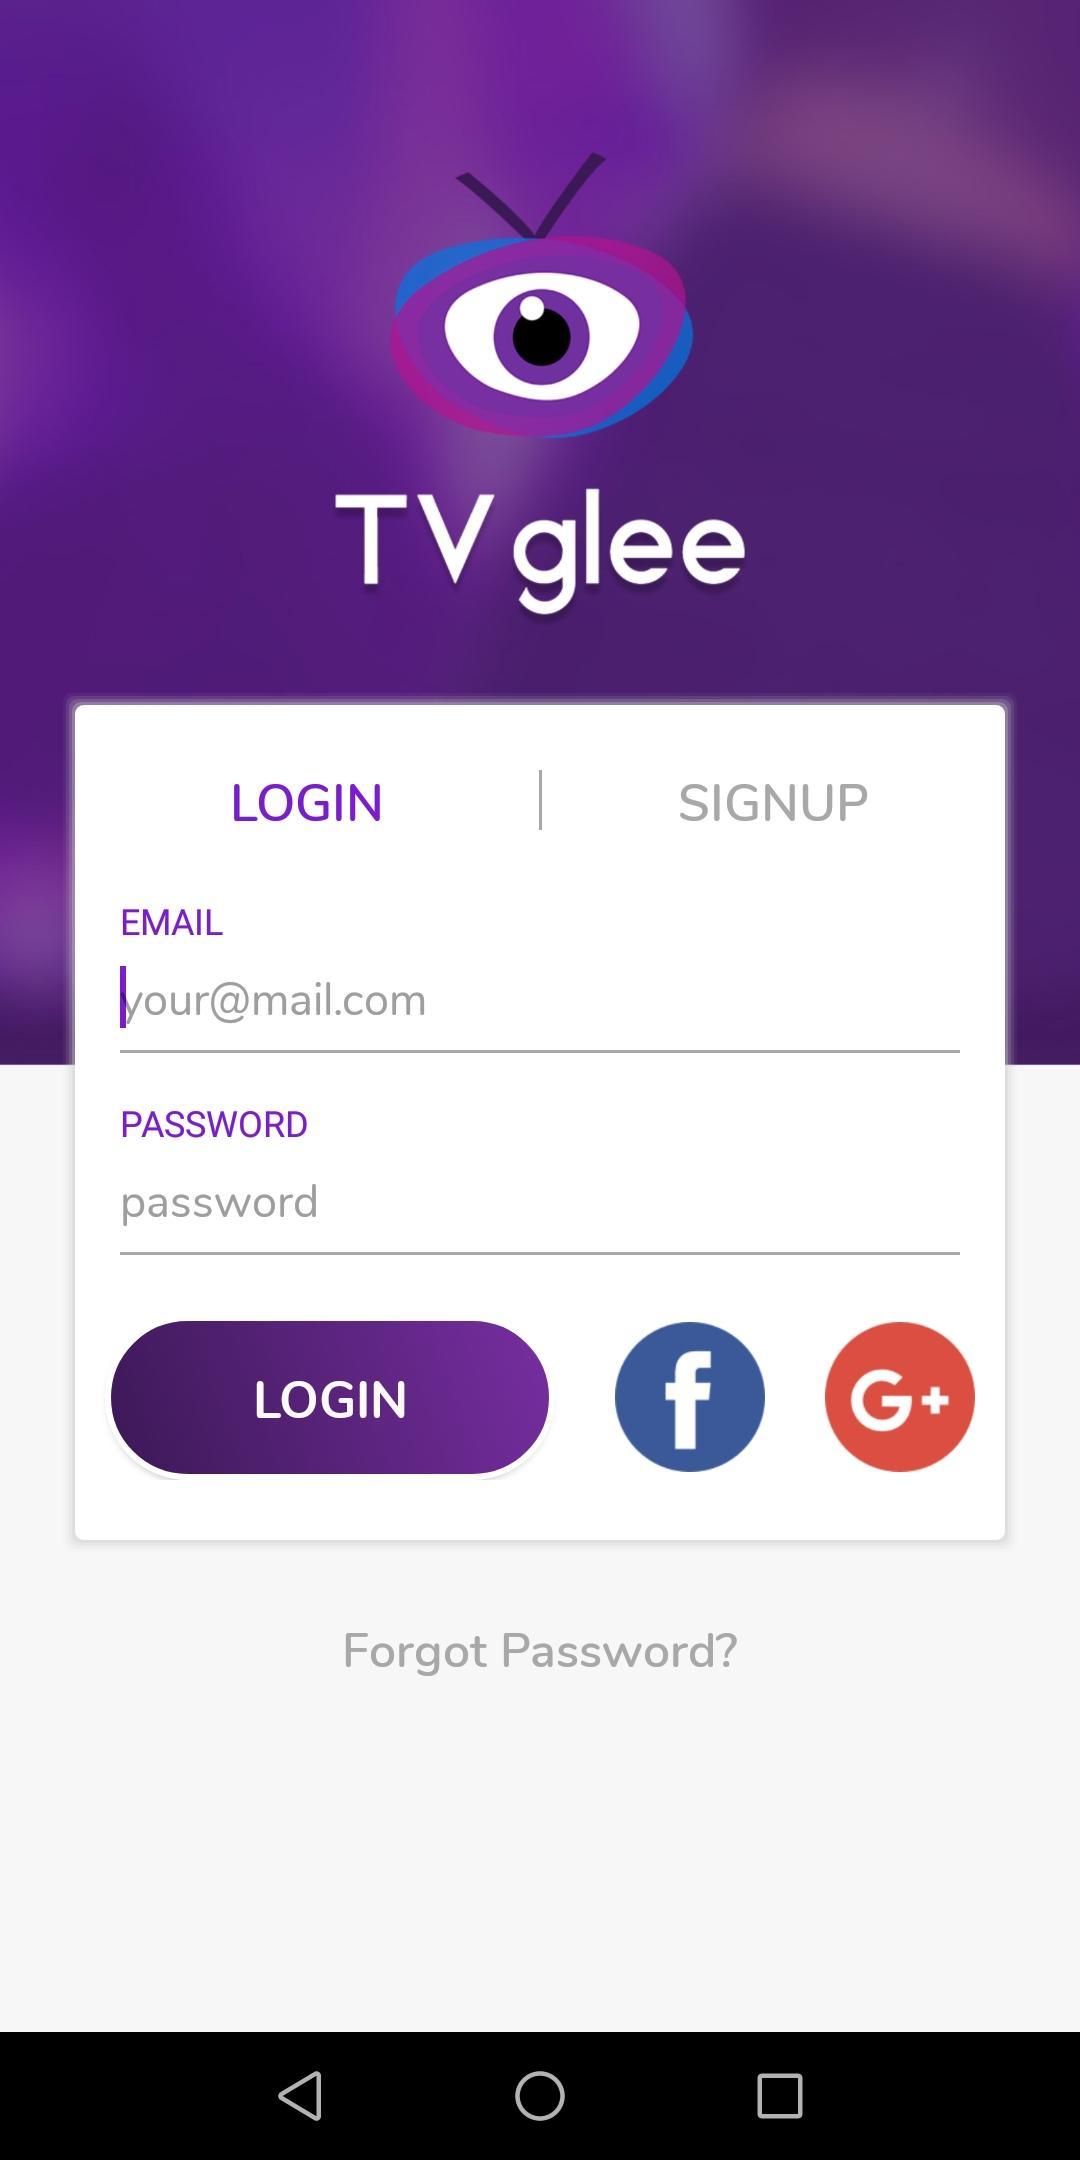 TV Glee for Android - APK Download